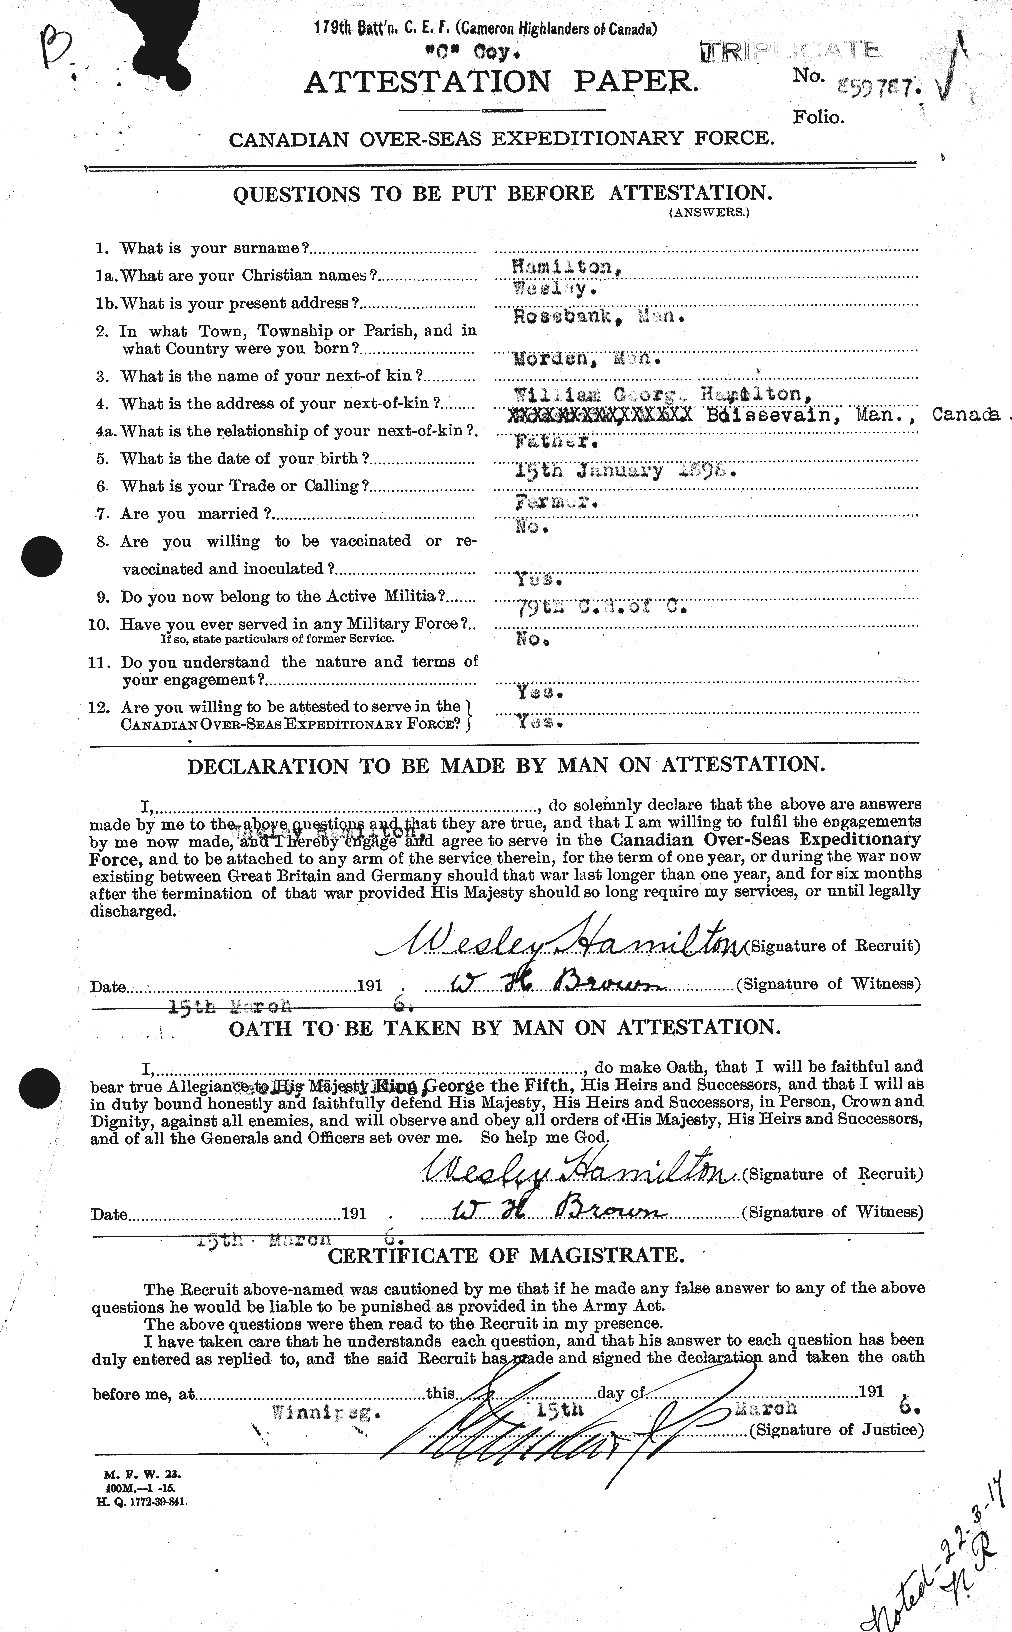 Personnel Records of the First World War - CEF 374818a